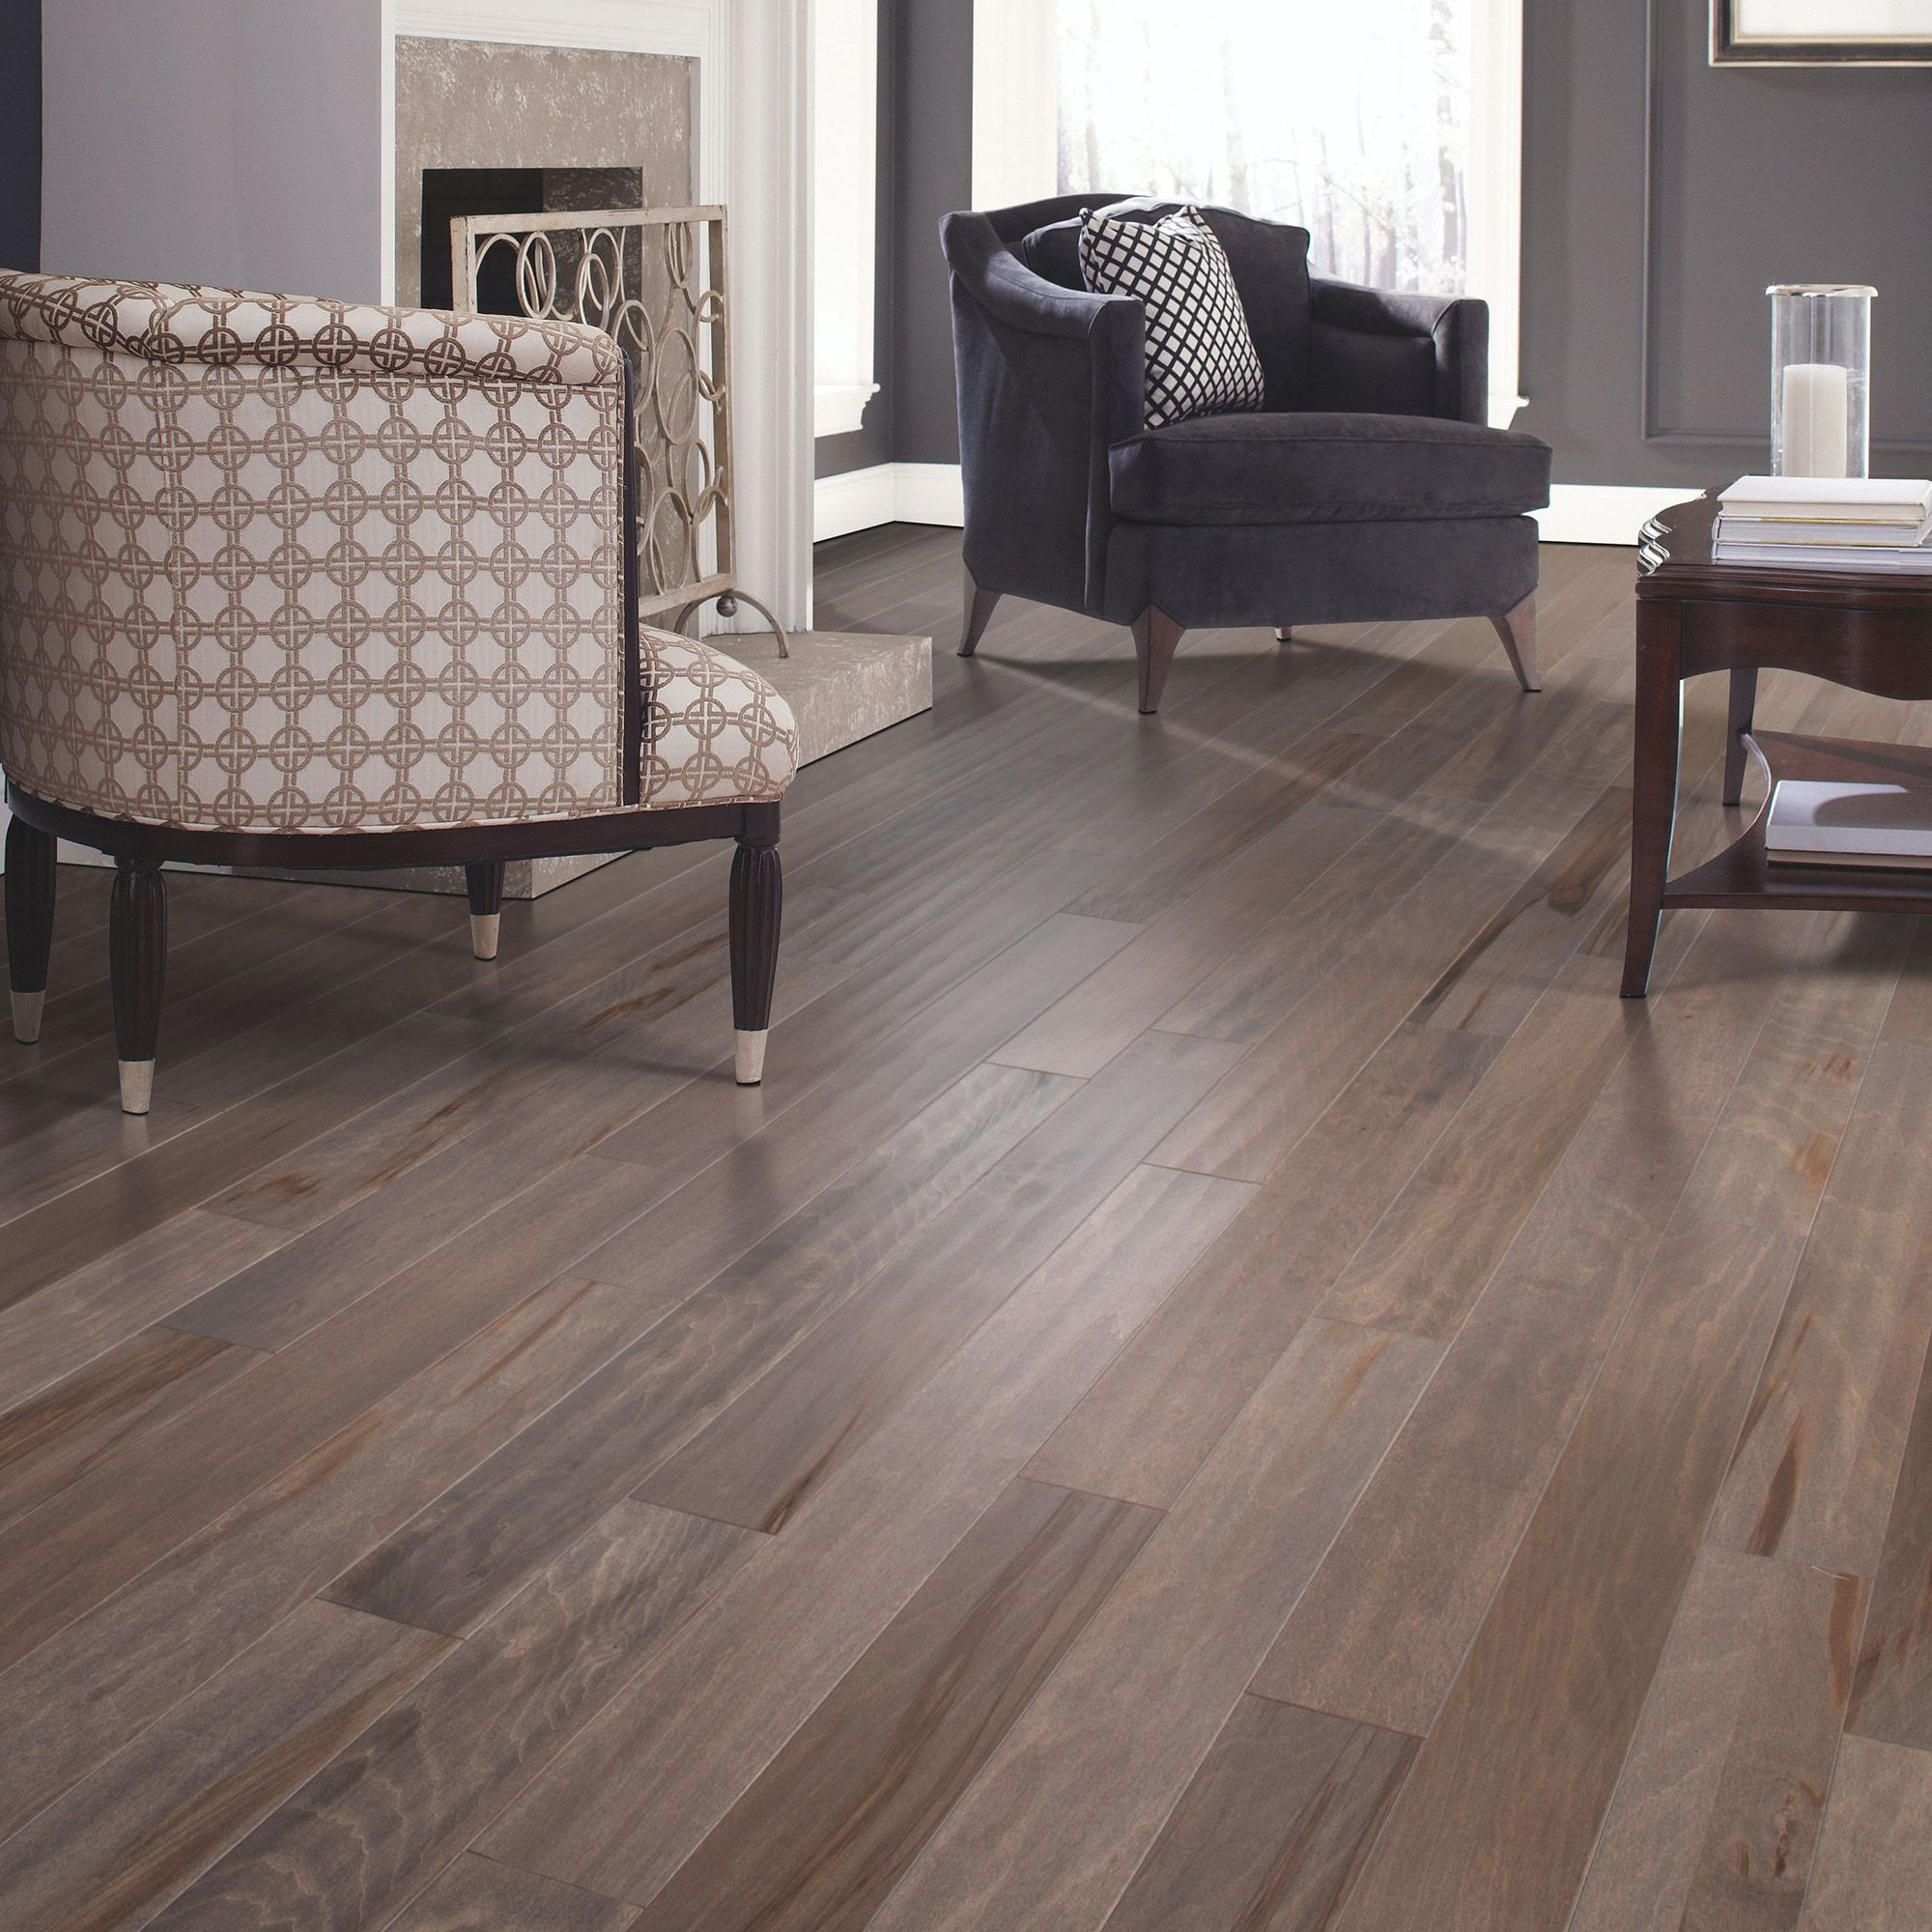 10 Awesome Different Types Of Engineered Hardwood Flooring Unique Flooring Ideas